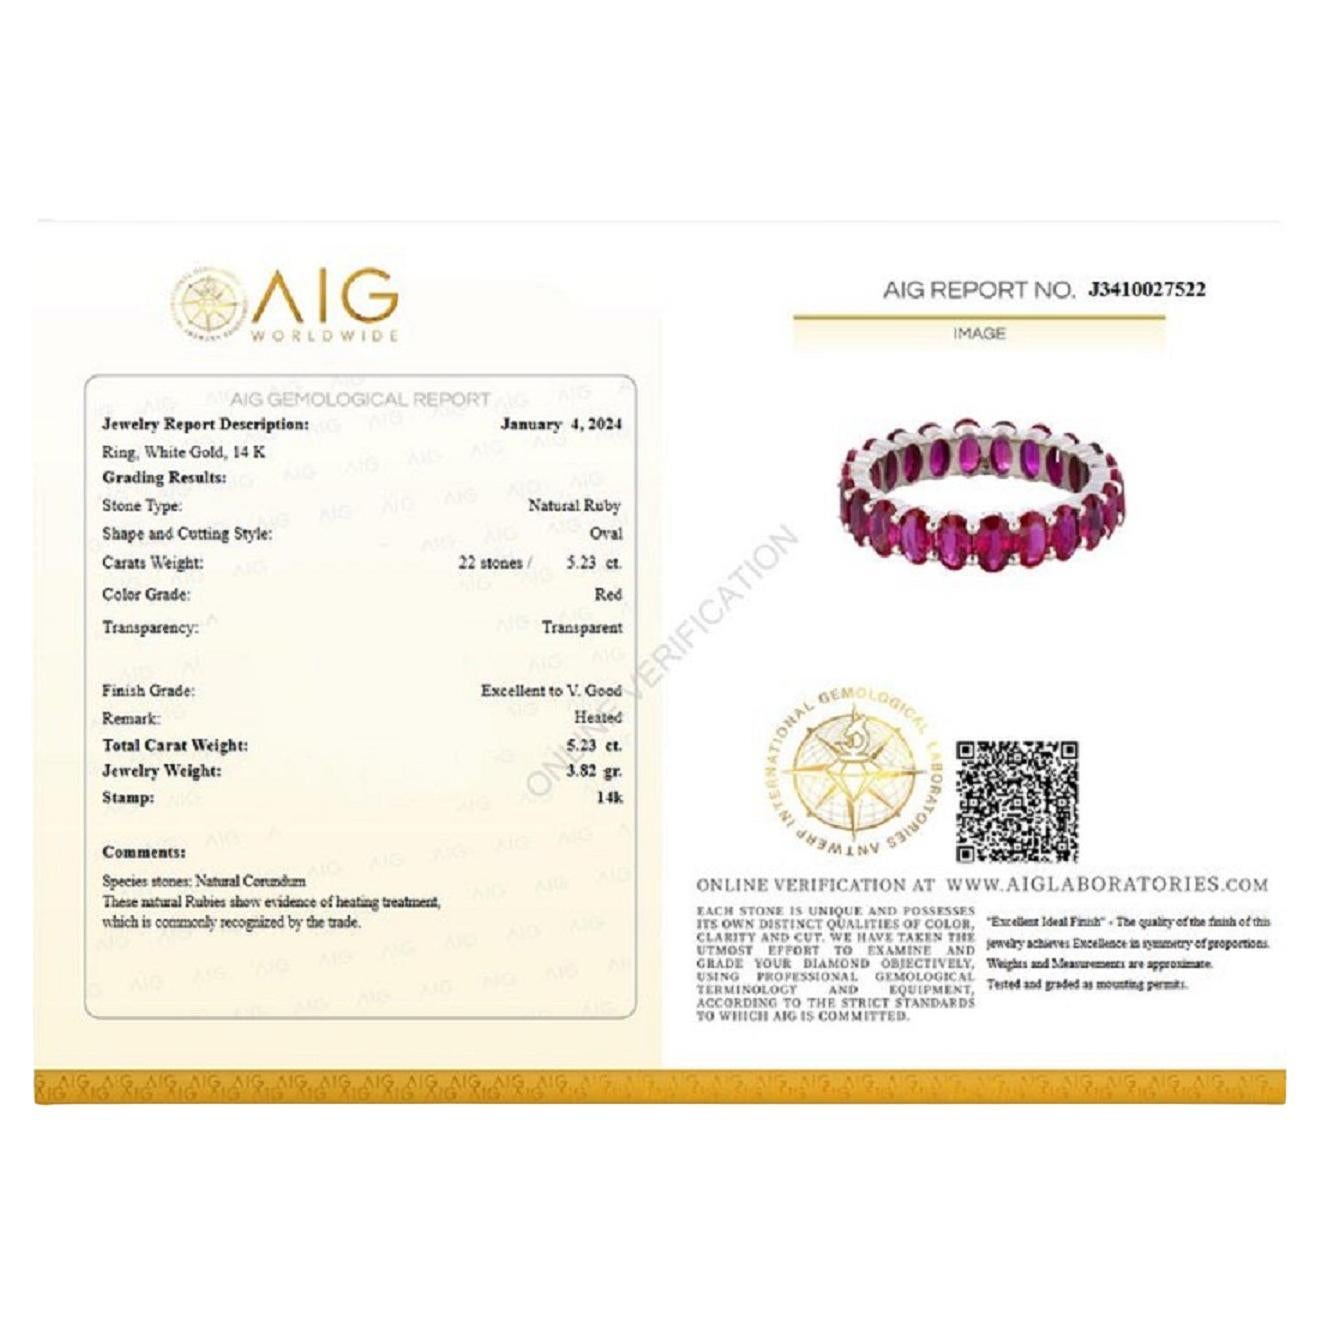 Ring Size: 58 EU

Center Stone:
___________
Natural Ruby
Cut: Oval
Carat: 5.23ct / 22 pieces
Color: Red
Heated

VAT and TAXES:

Please be aware that your country of residence may impose customs and import duties.

Duties and Taxes are not included